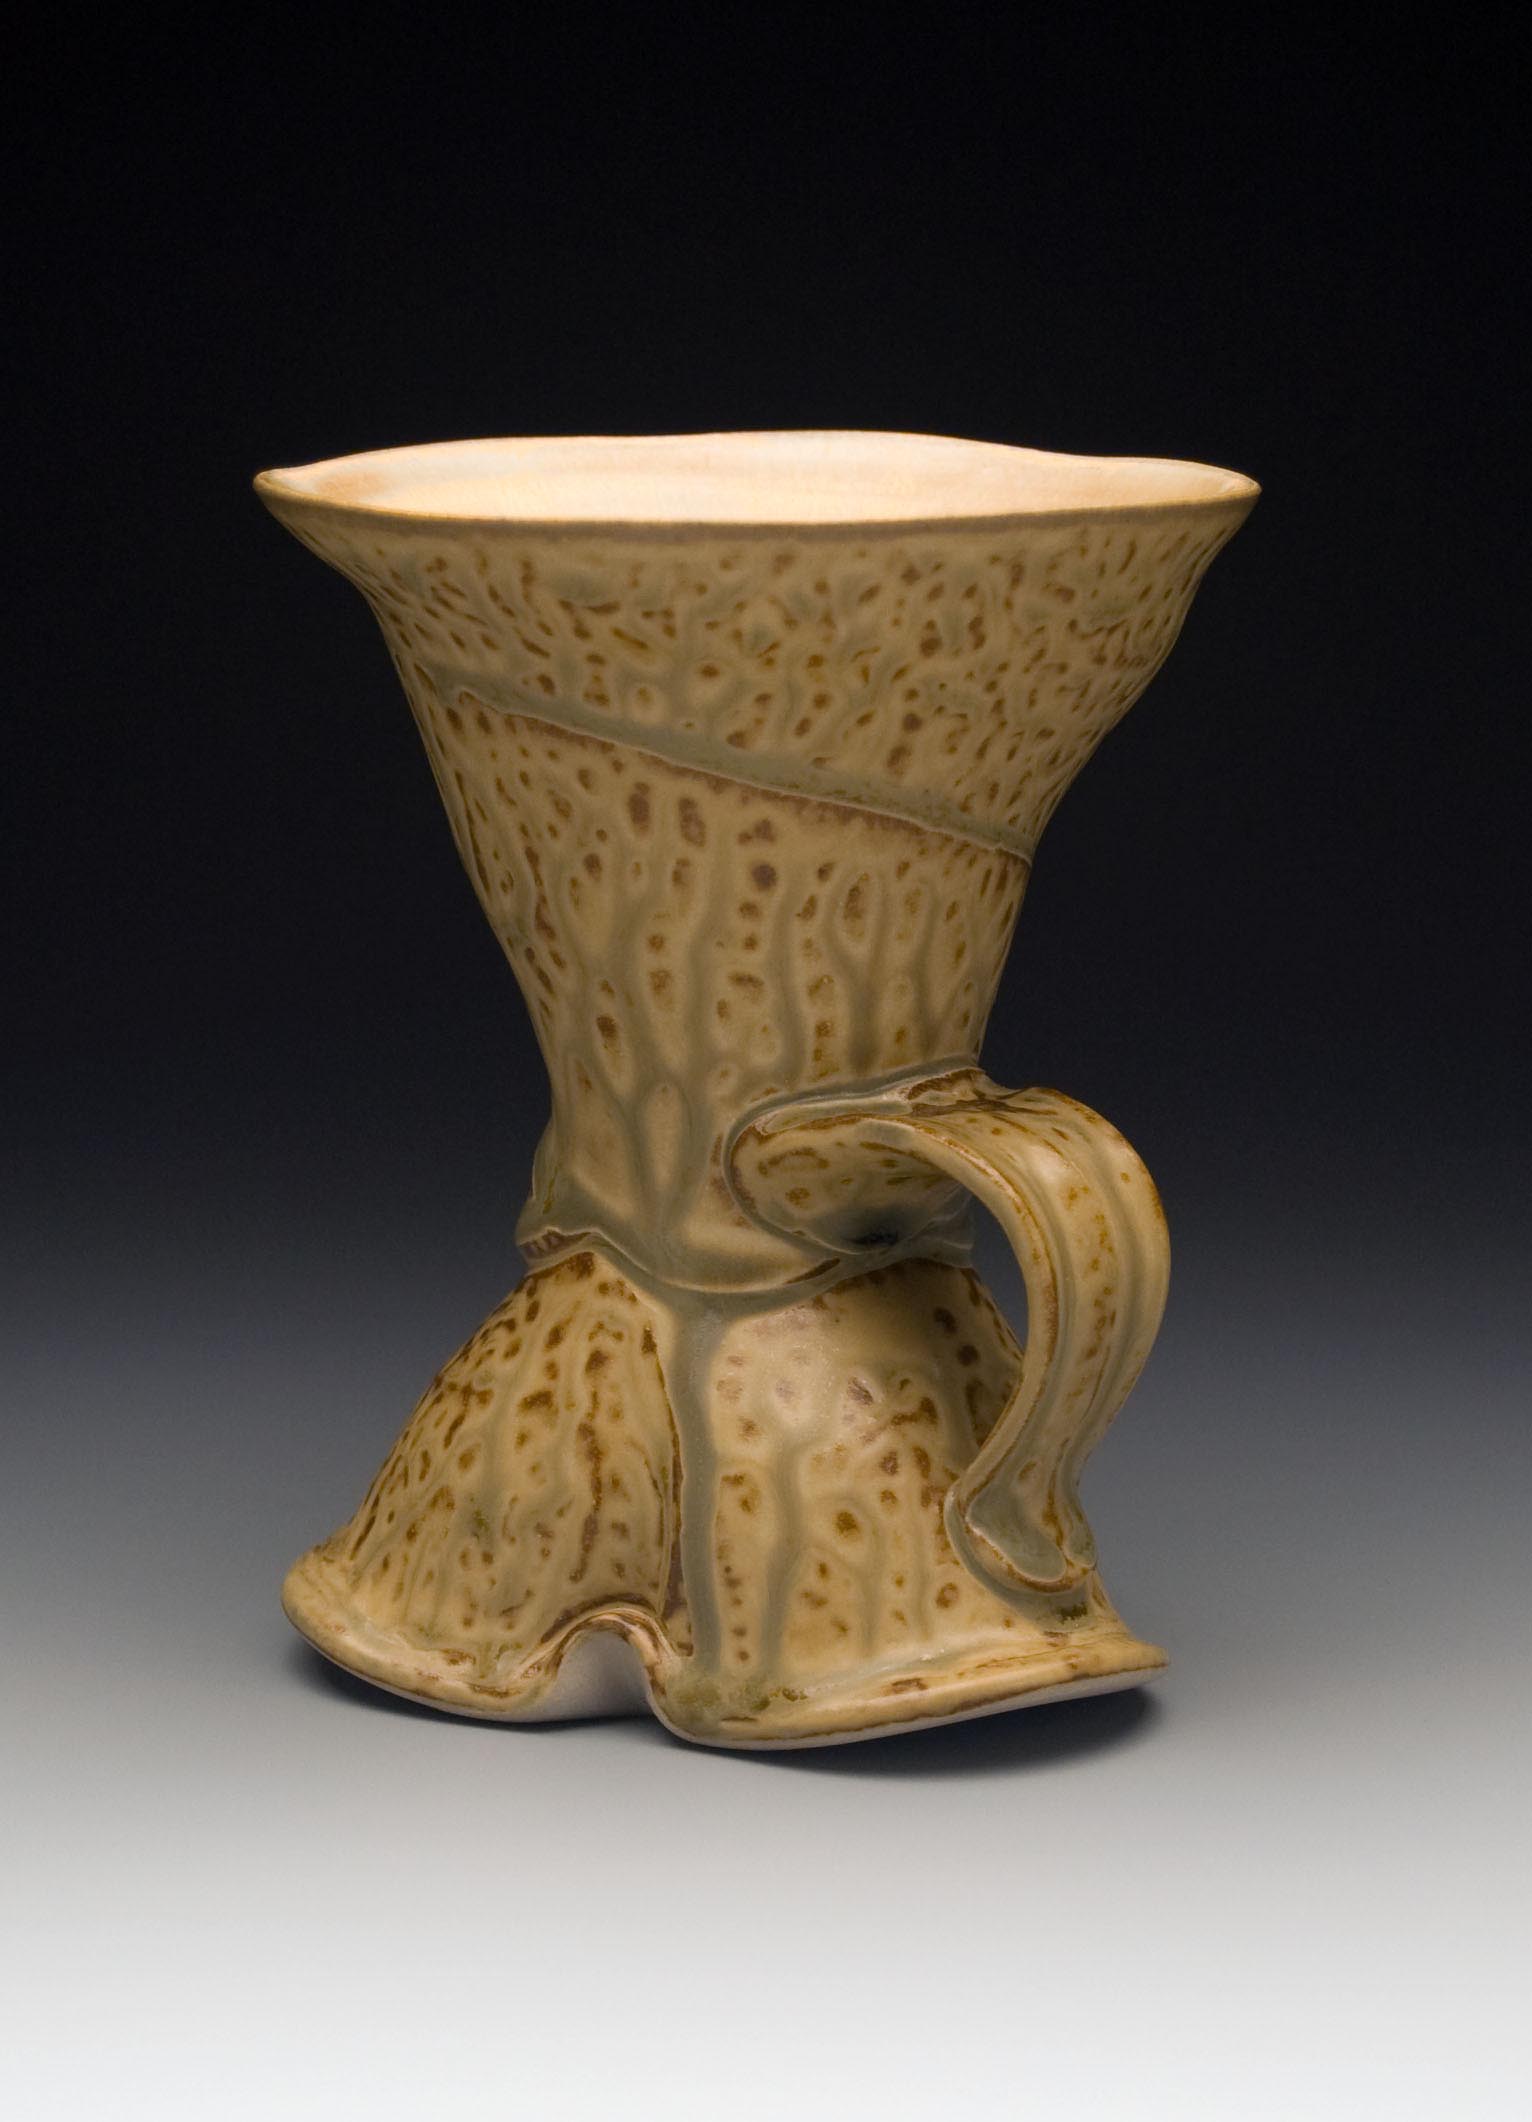 art of the cup at the ogden museum by conner burns